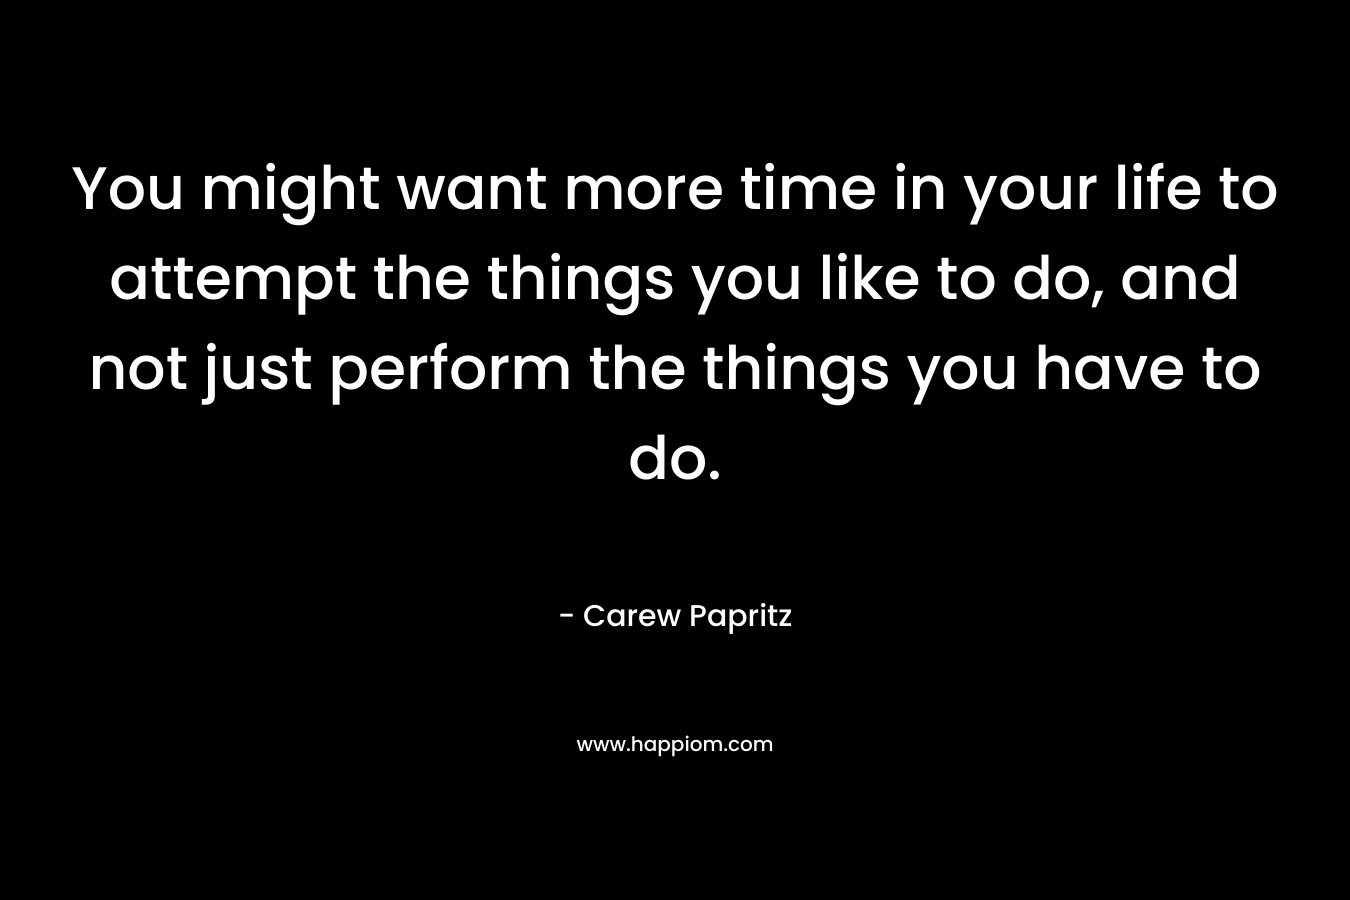 You might want more time in your life to attempt the things you like to do, and not just perform the things you have to do.